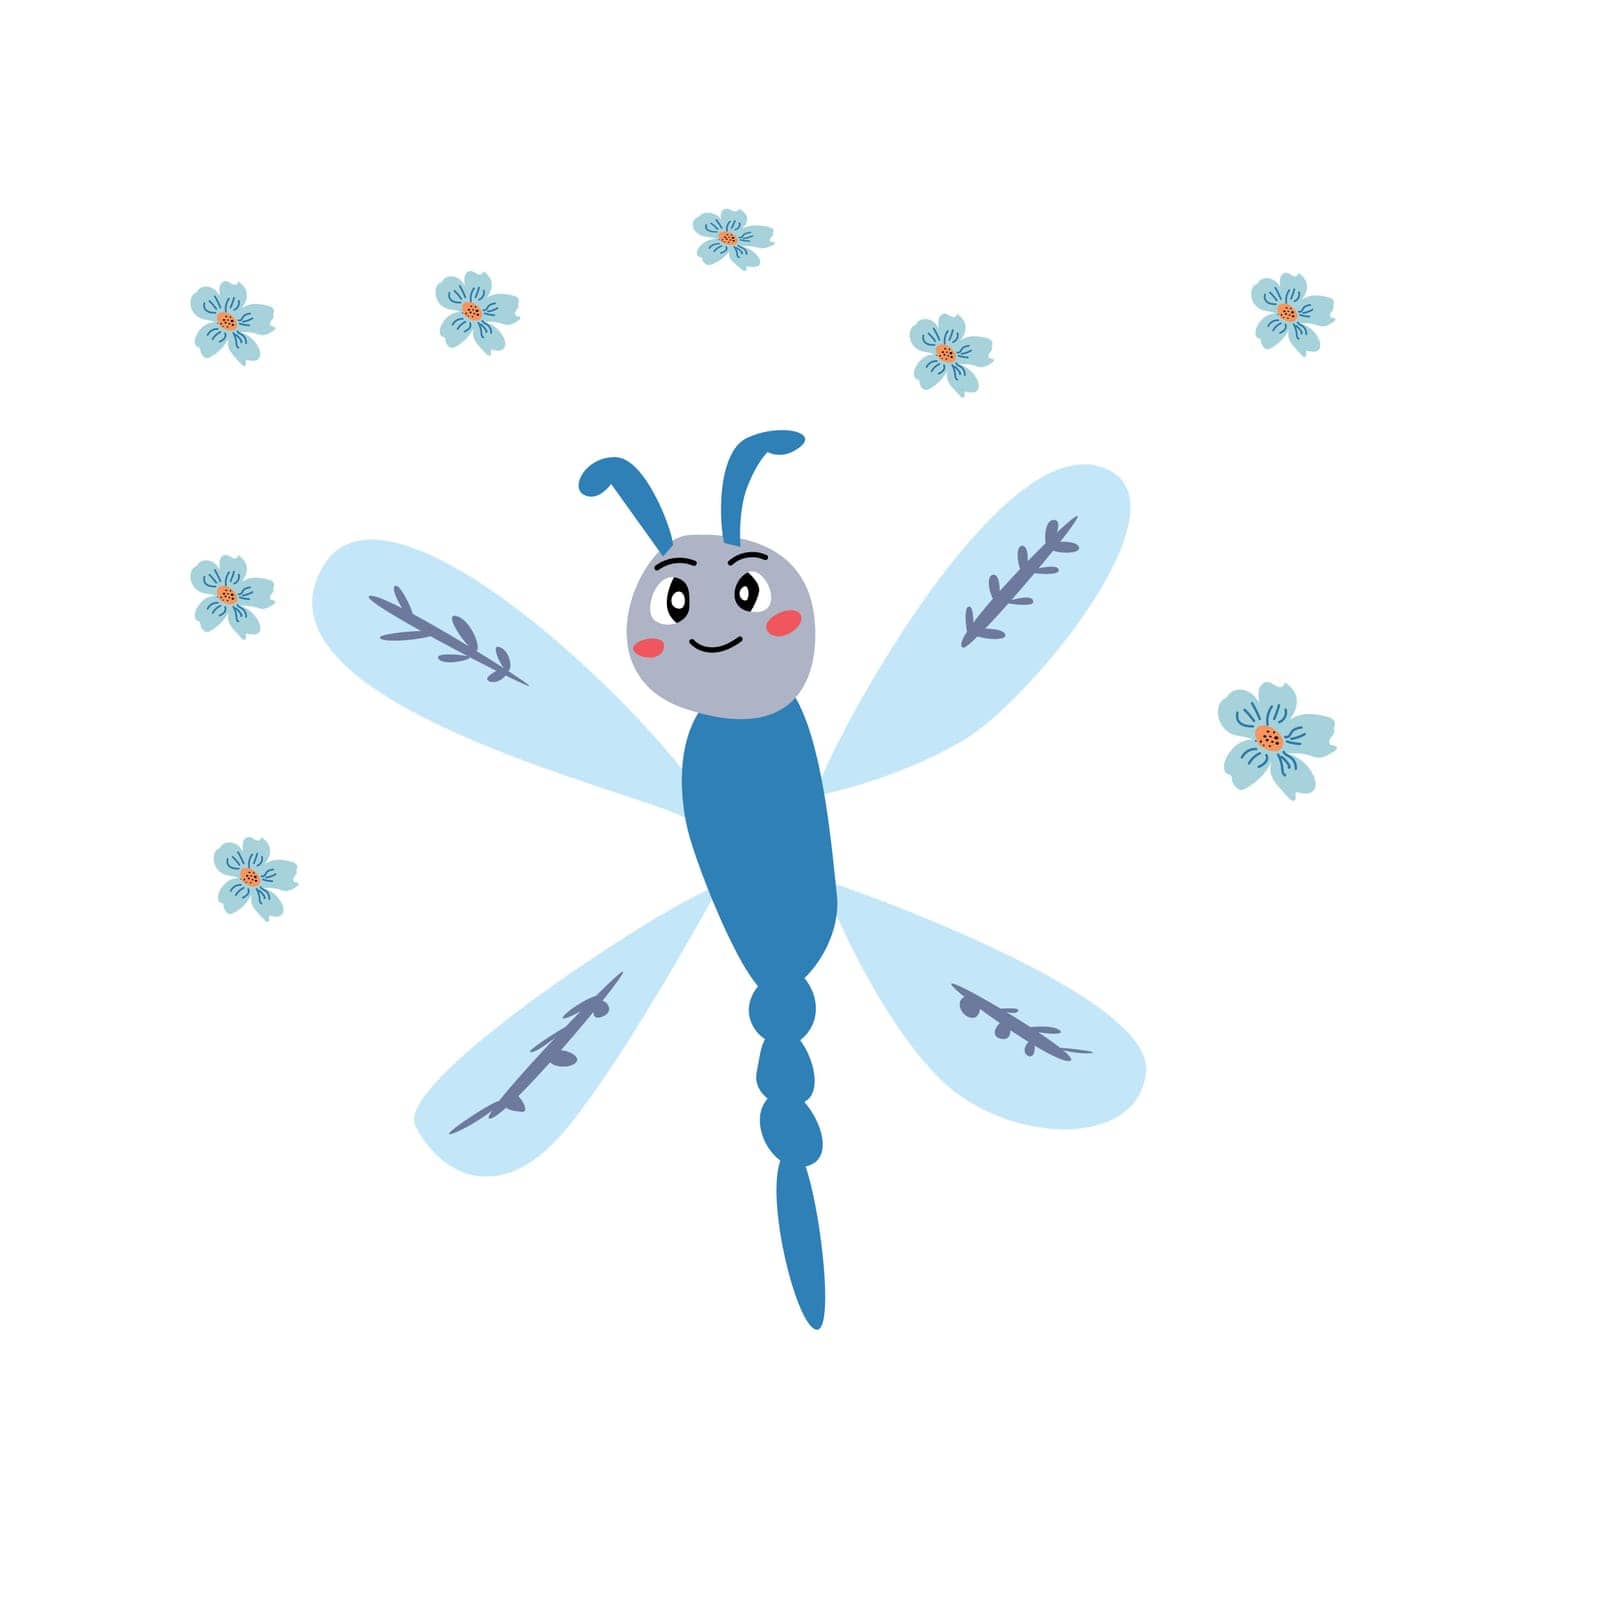 cute cartoon dragonfly and flower - backdrop. Vector illustration usable for covers, stikers, wallpapers, kids cards, party labels, textile print design, posters, postcards.